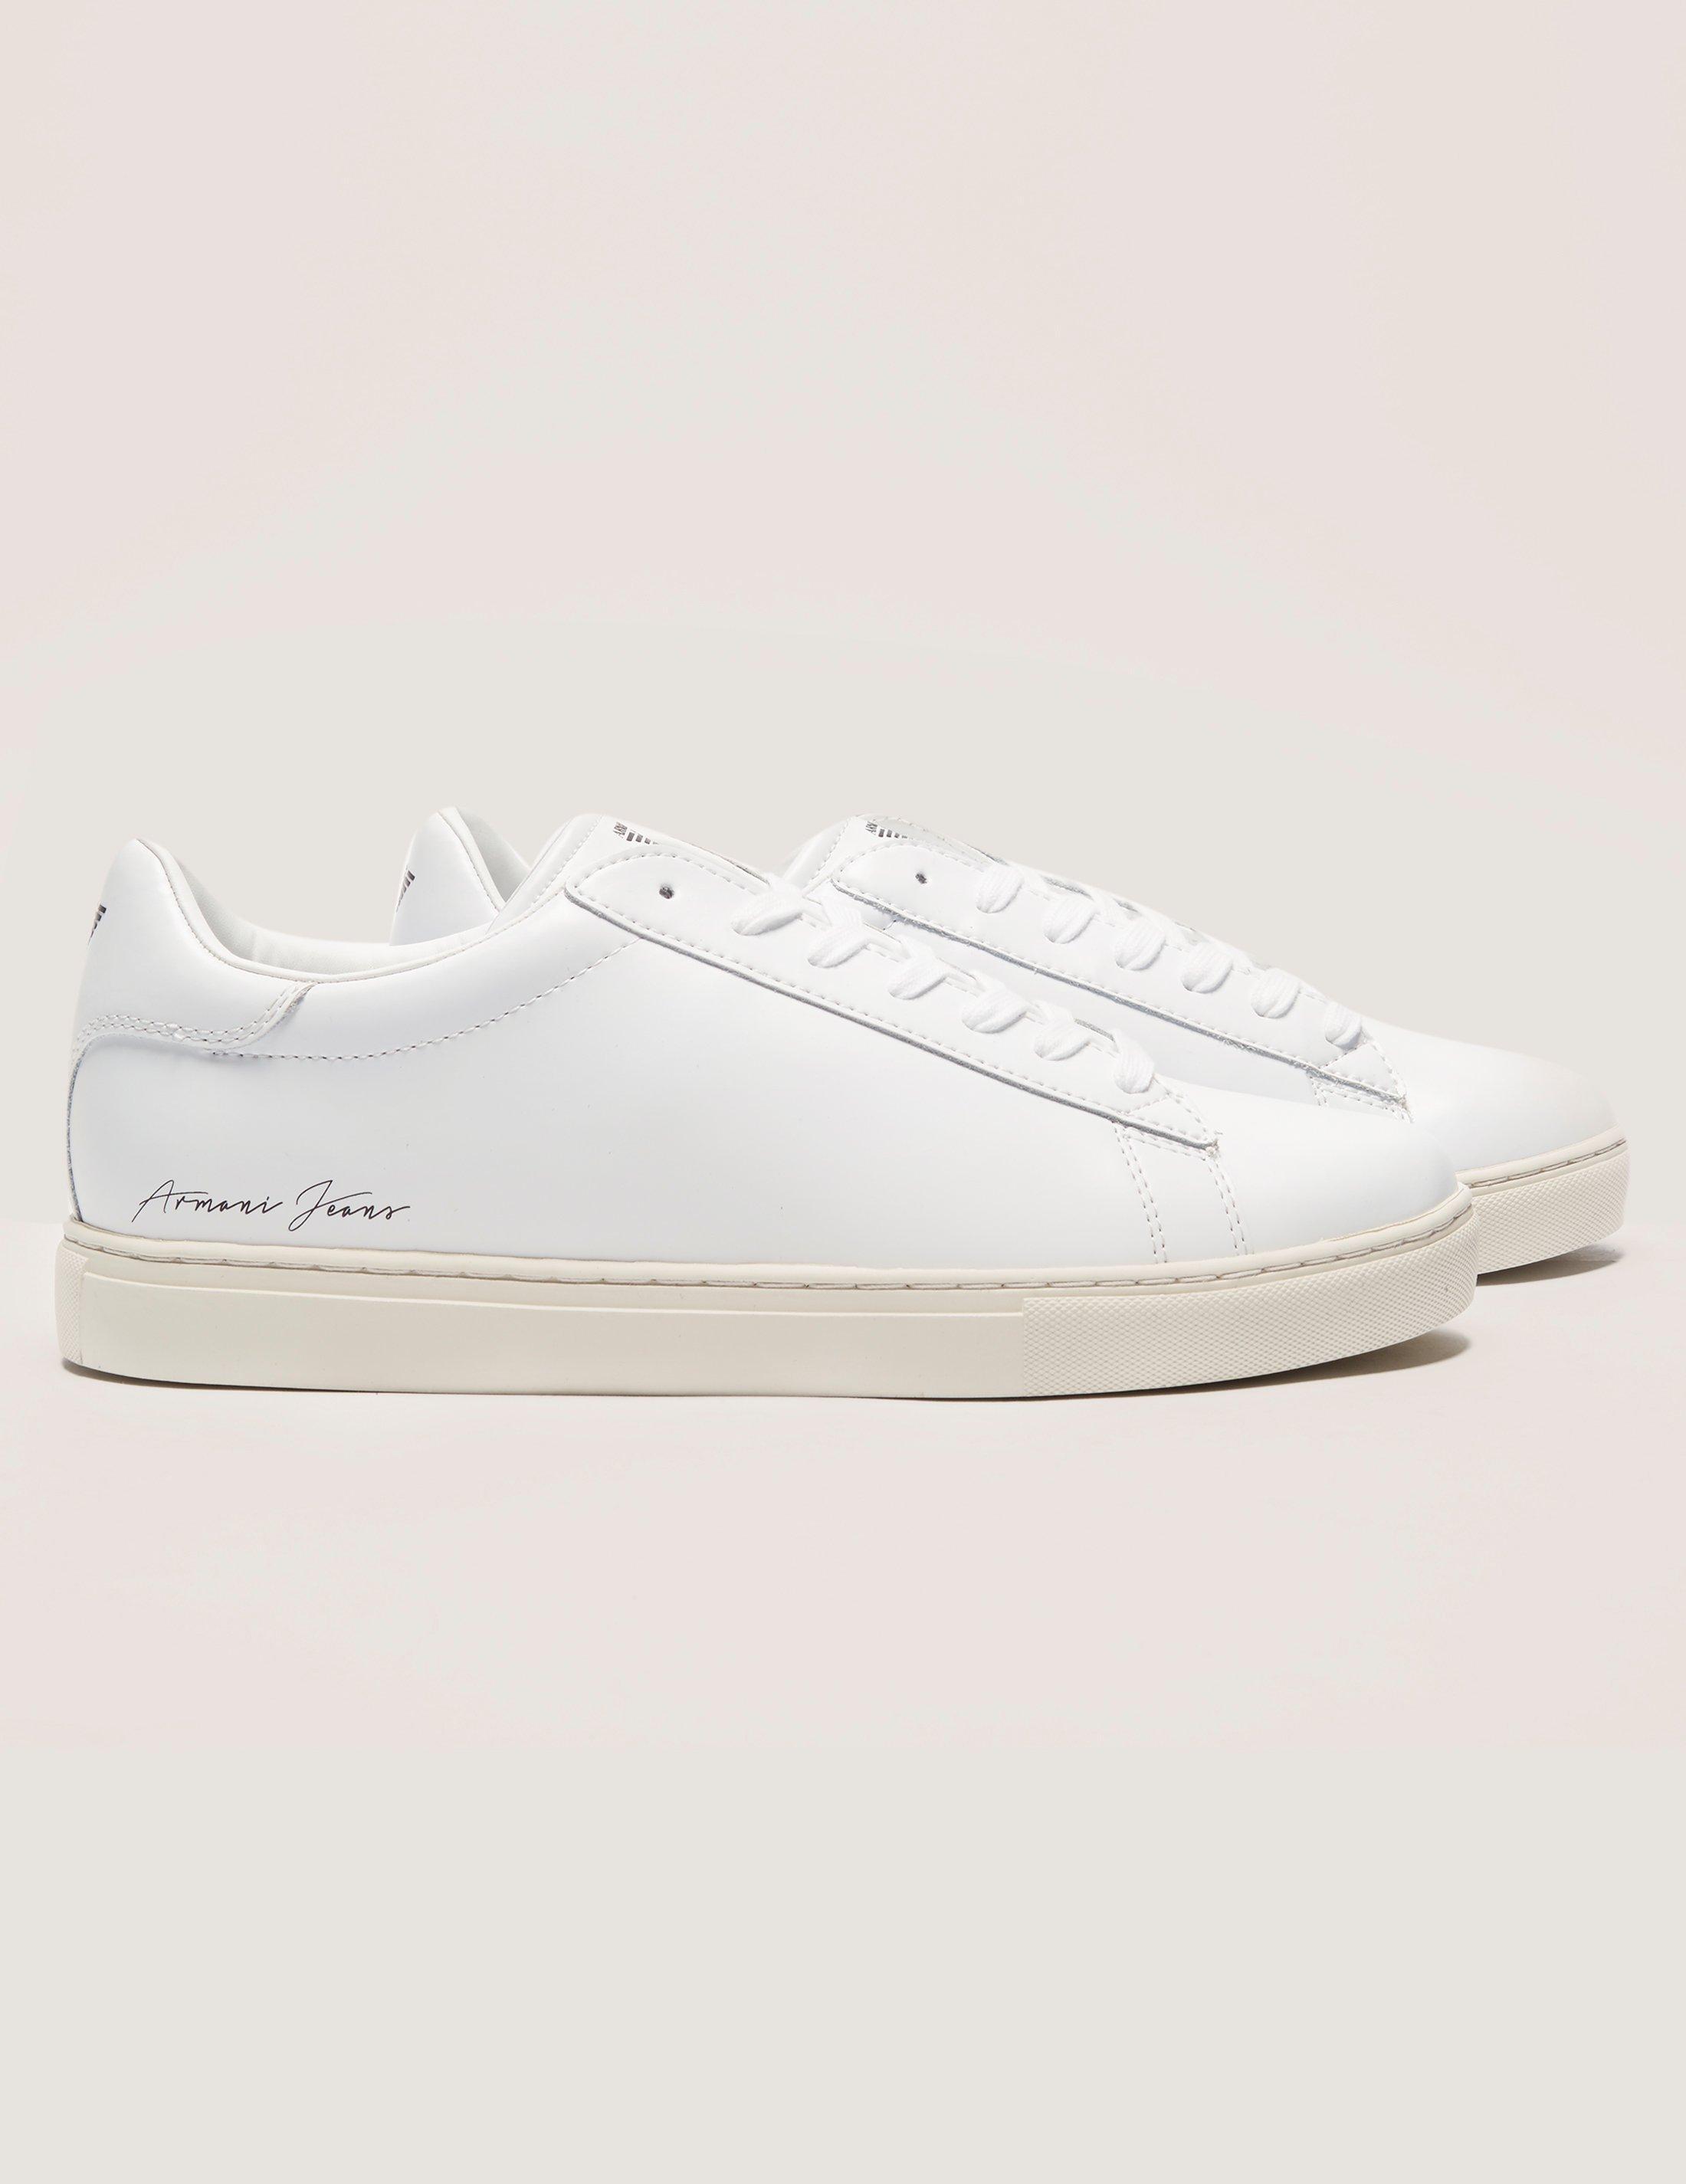 armani jeans white shoes, OFF 77%,Buy!